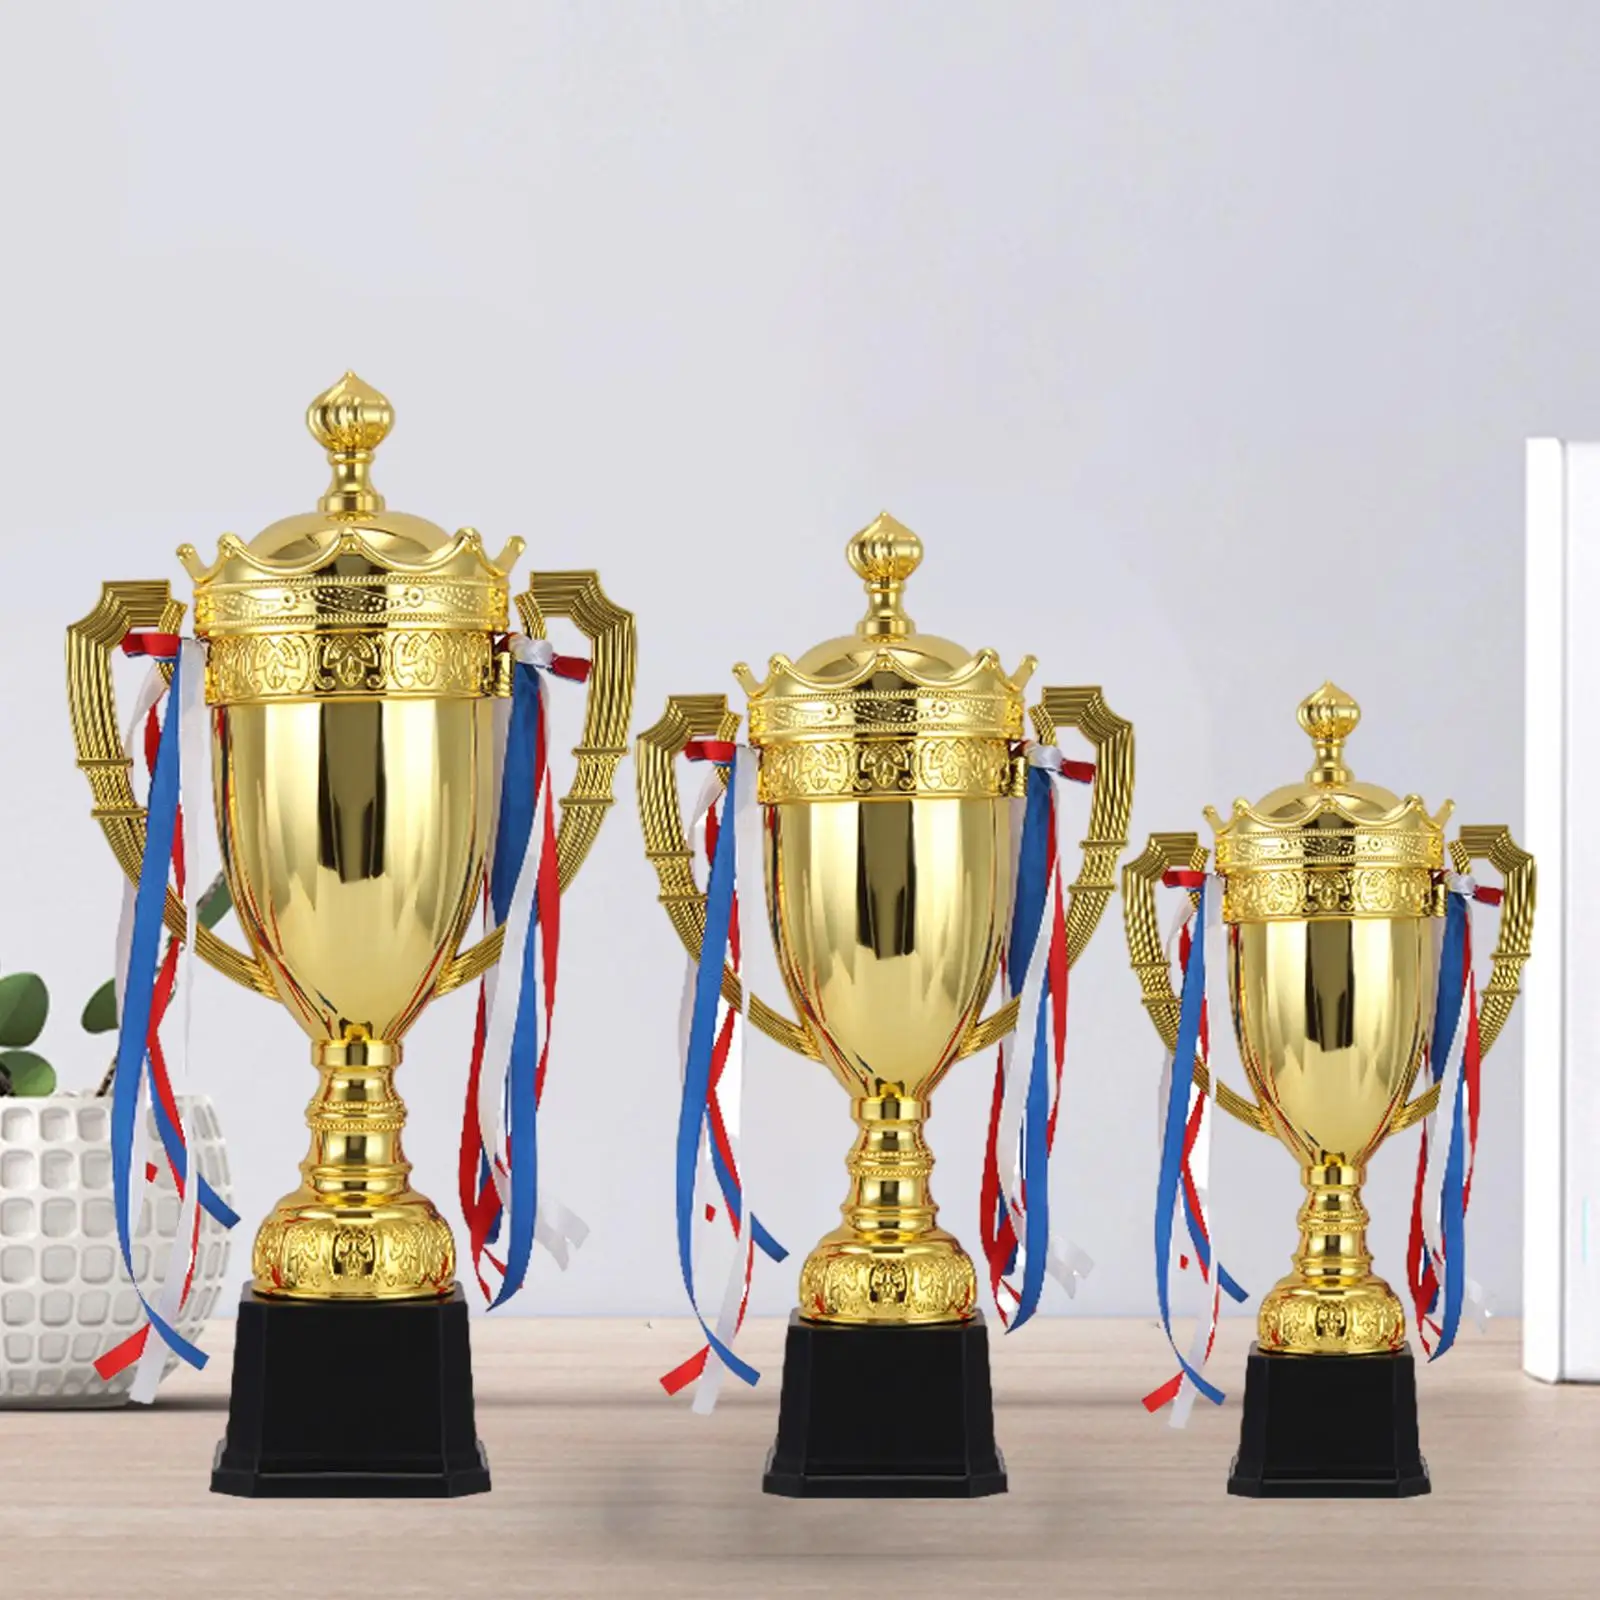 Award Trophy Cup Trophy for Kids for Sports Championships Rewards Football